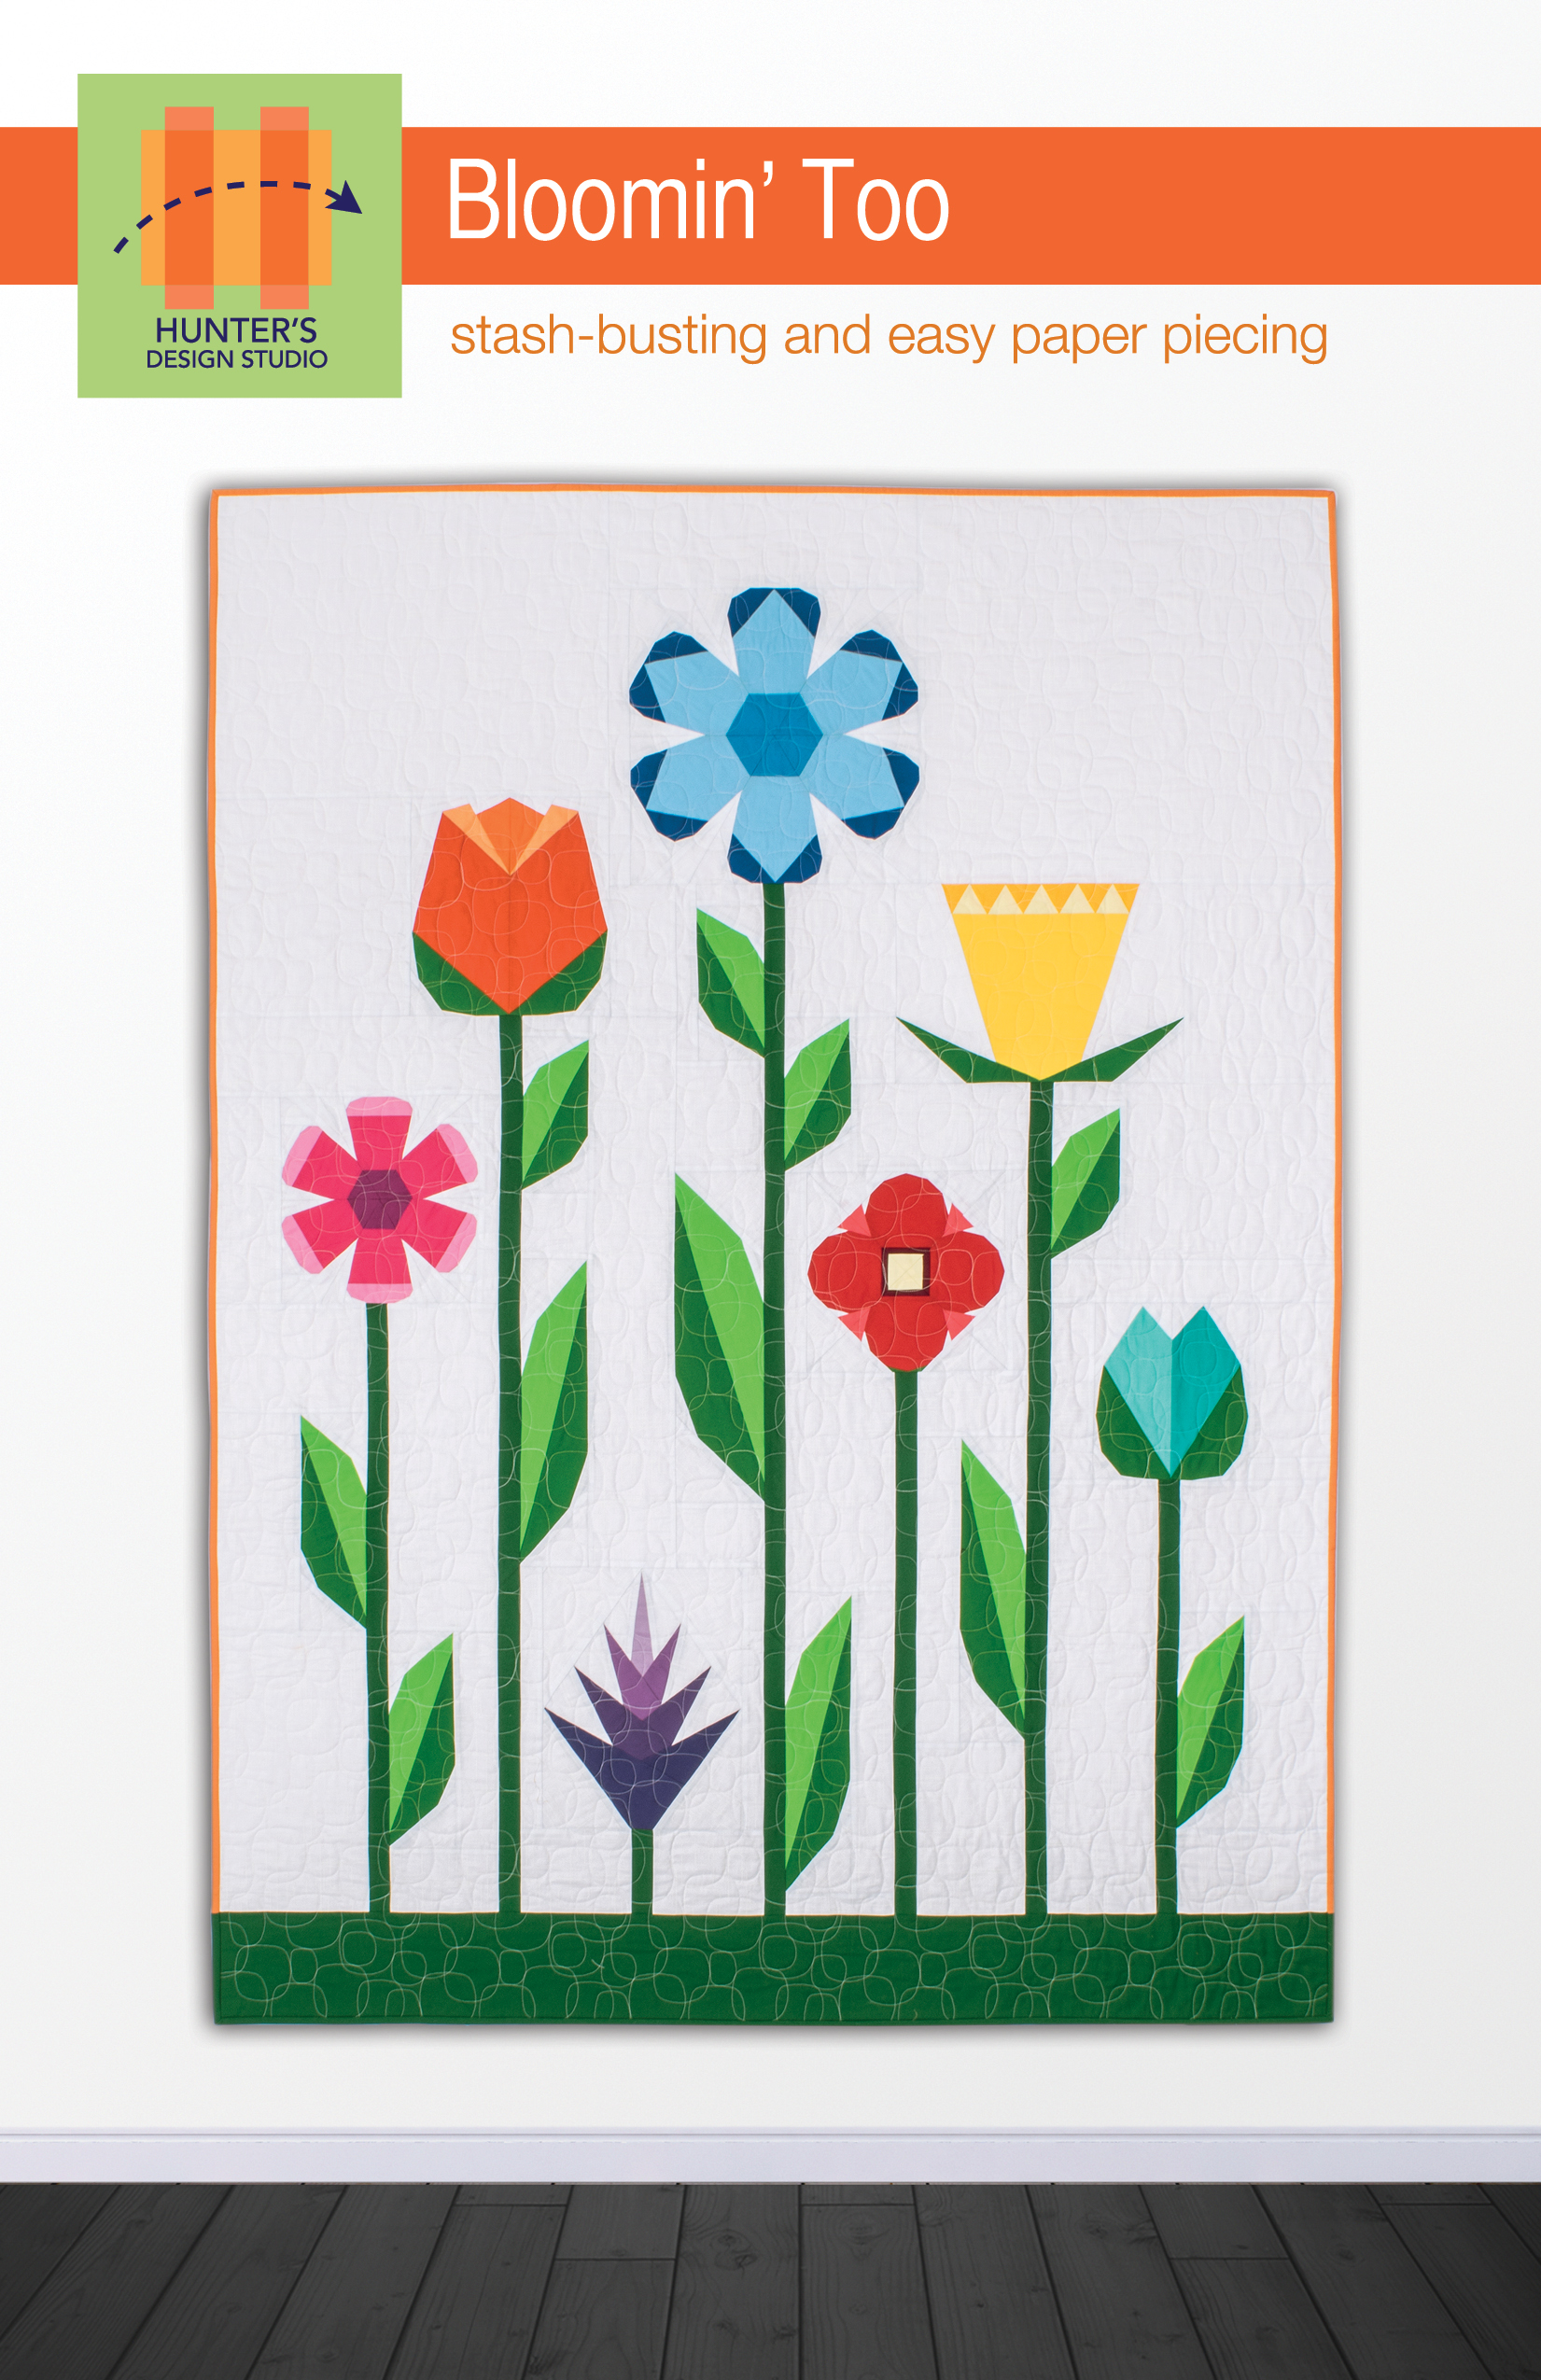 Bloomin' Too is a quilt pattern that features seven flowers made with foundation paper piecing.